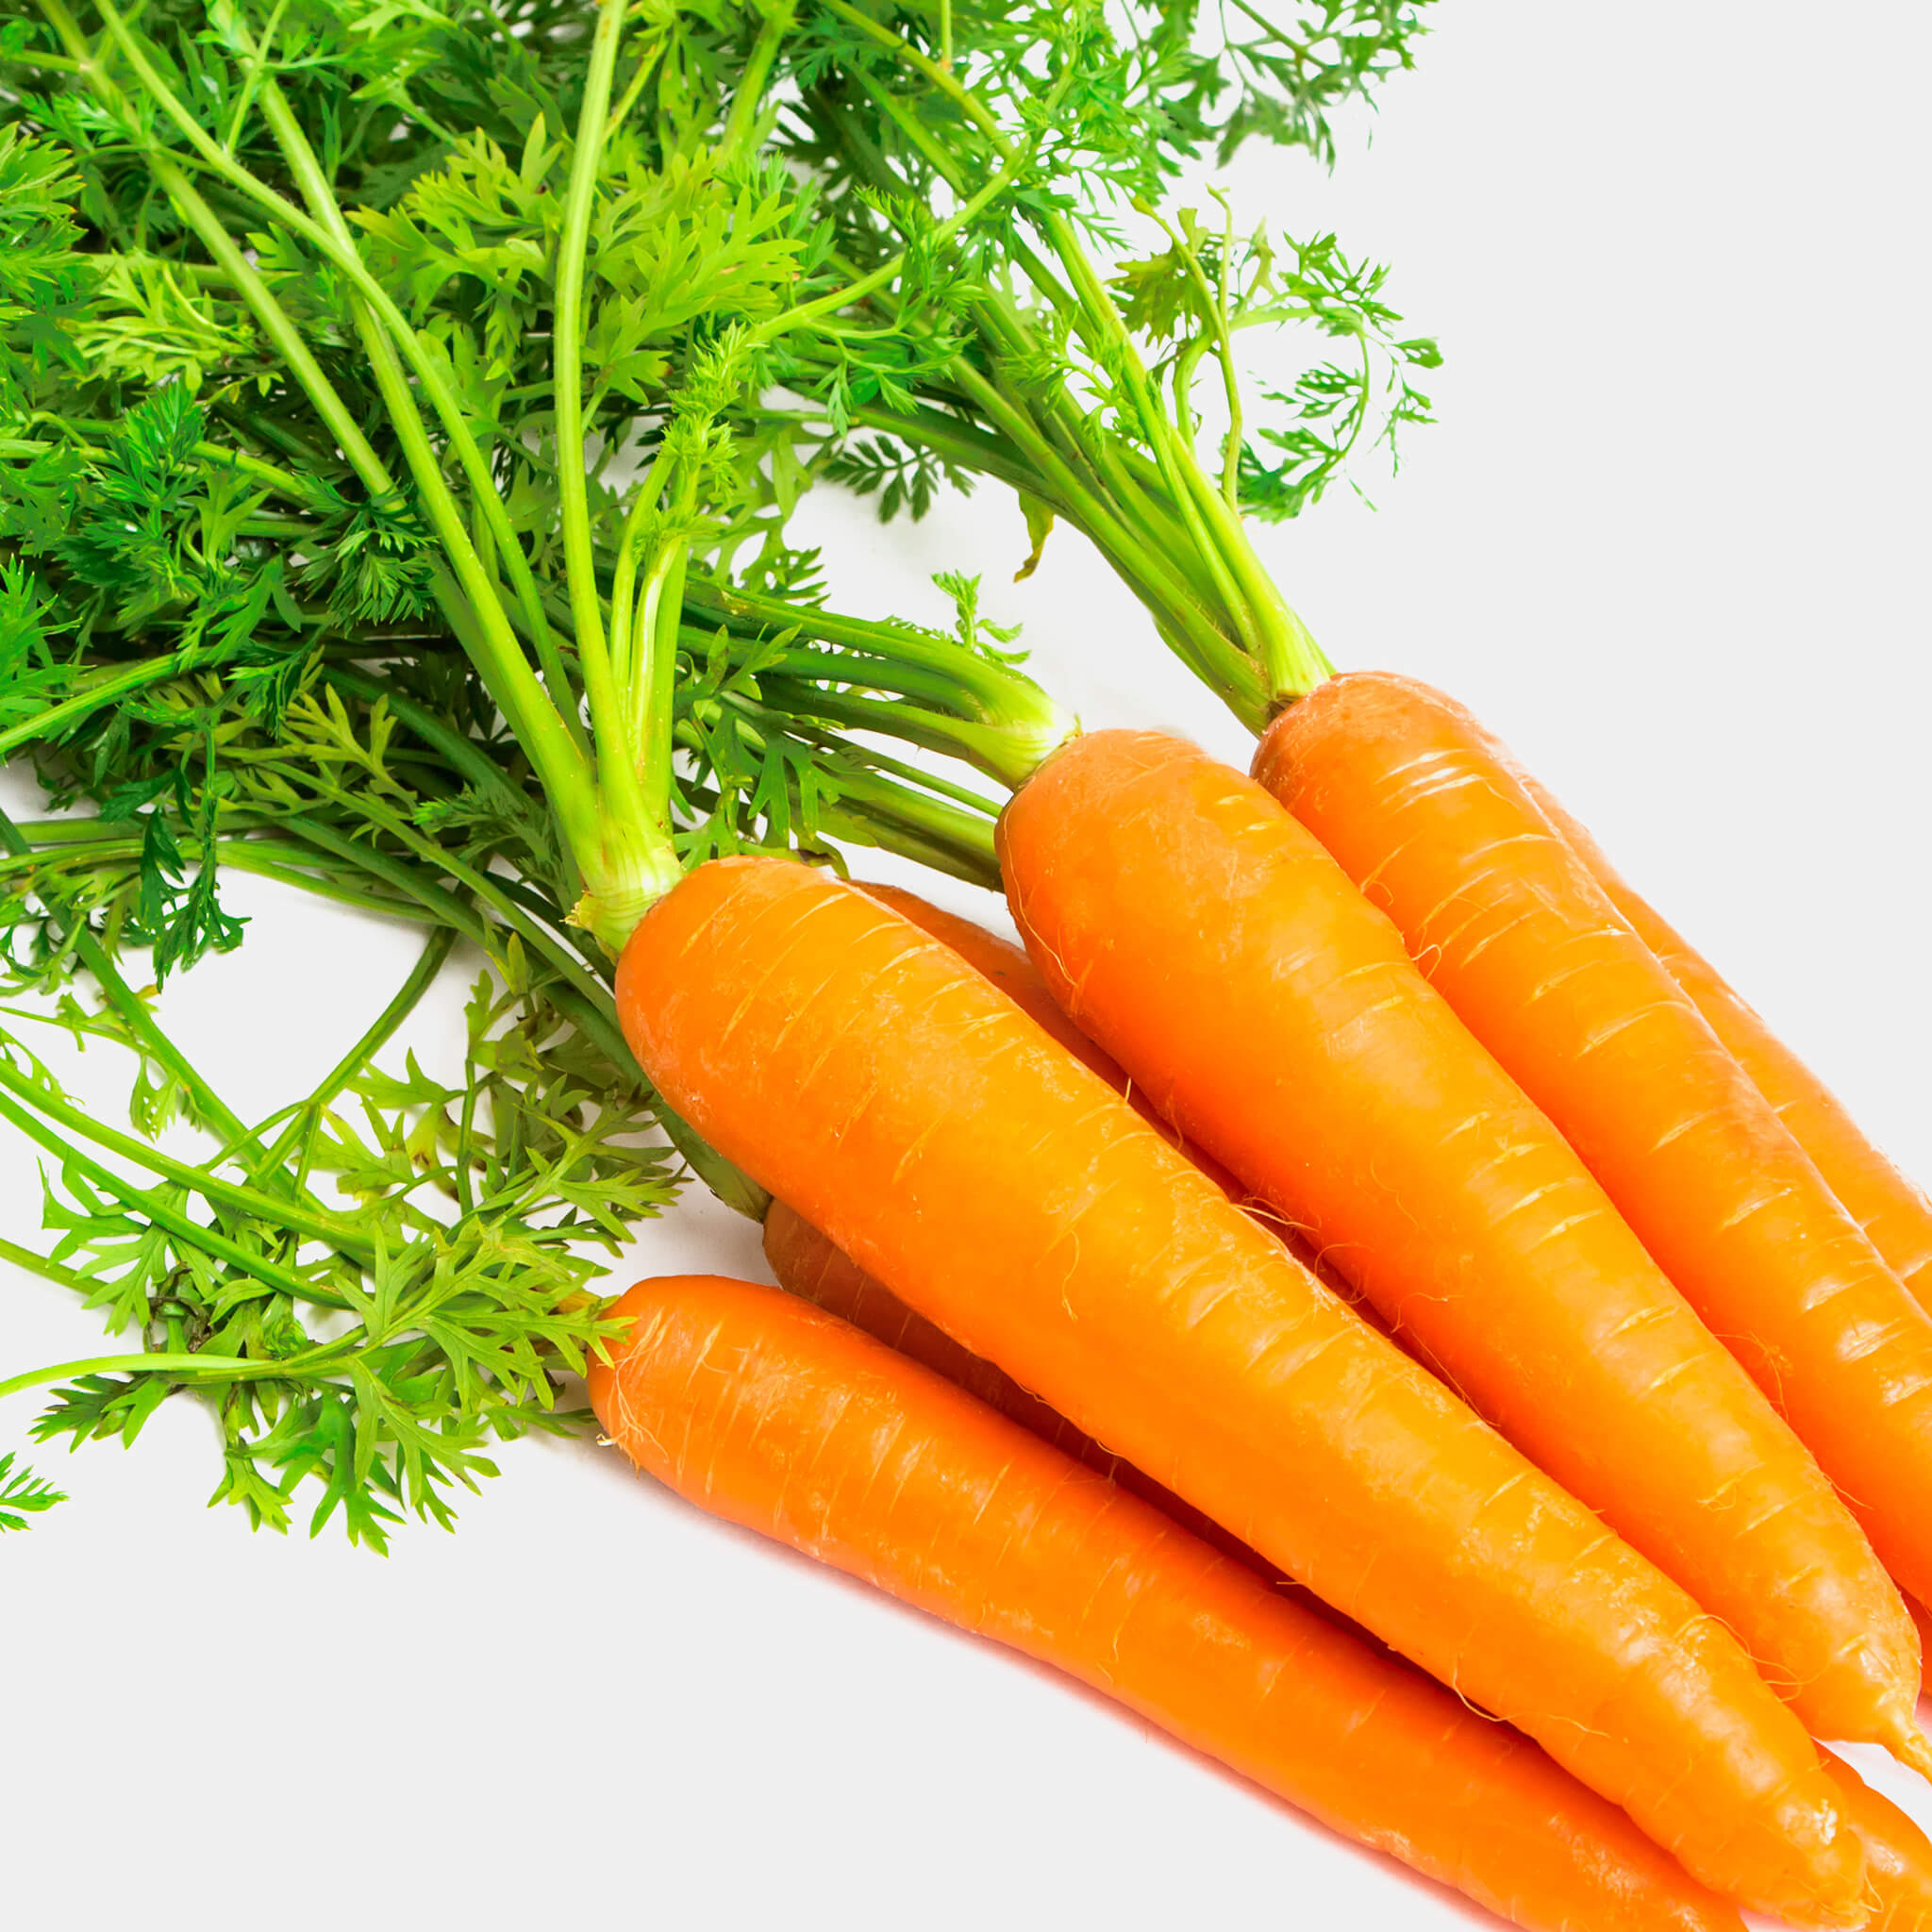 Product Page Key Ingredients: Carrot